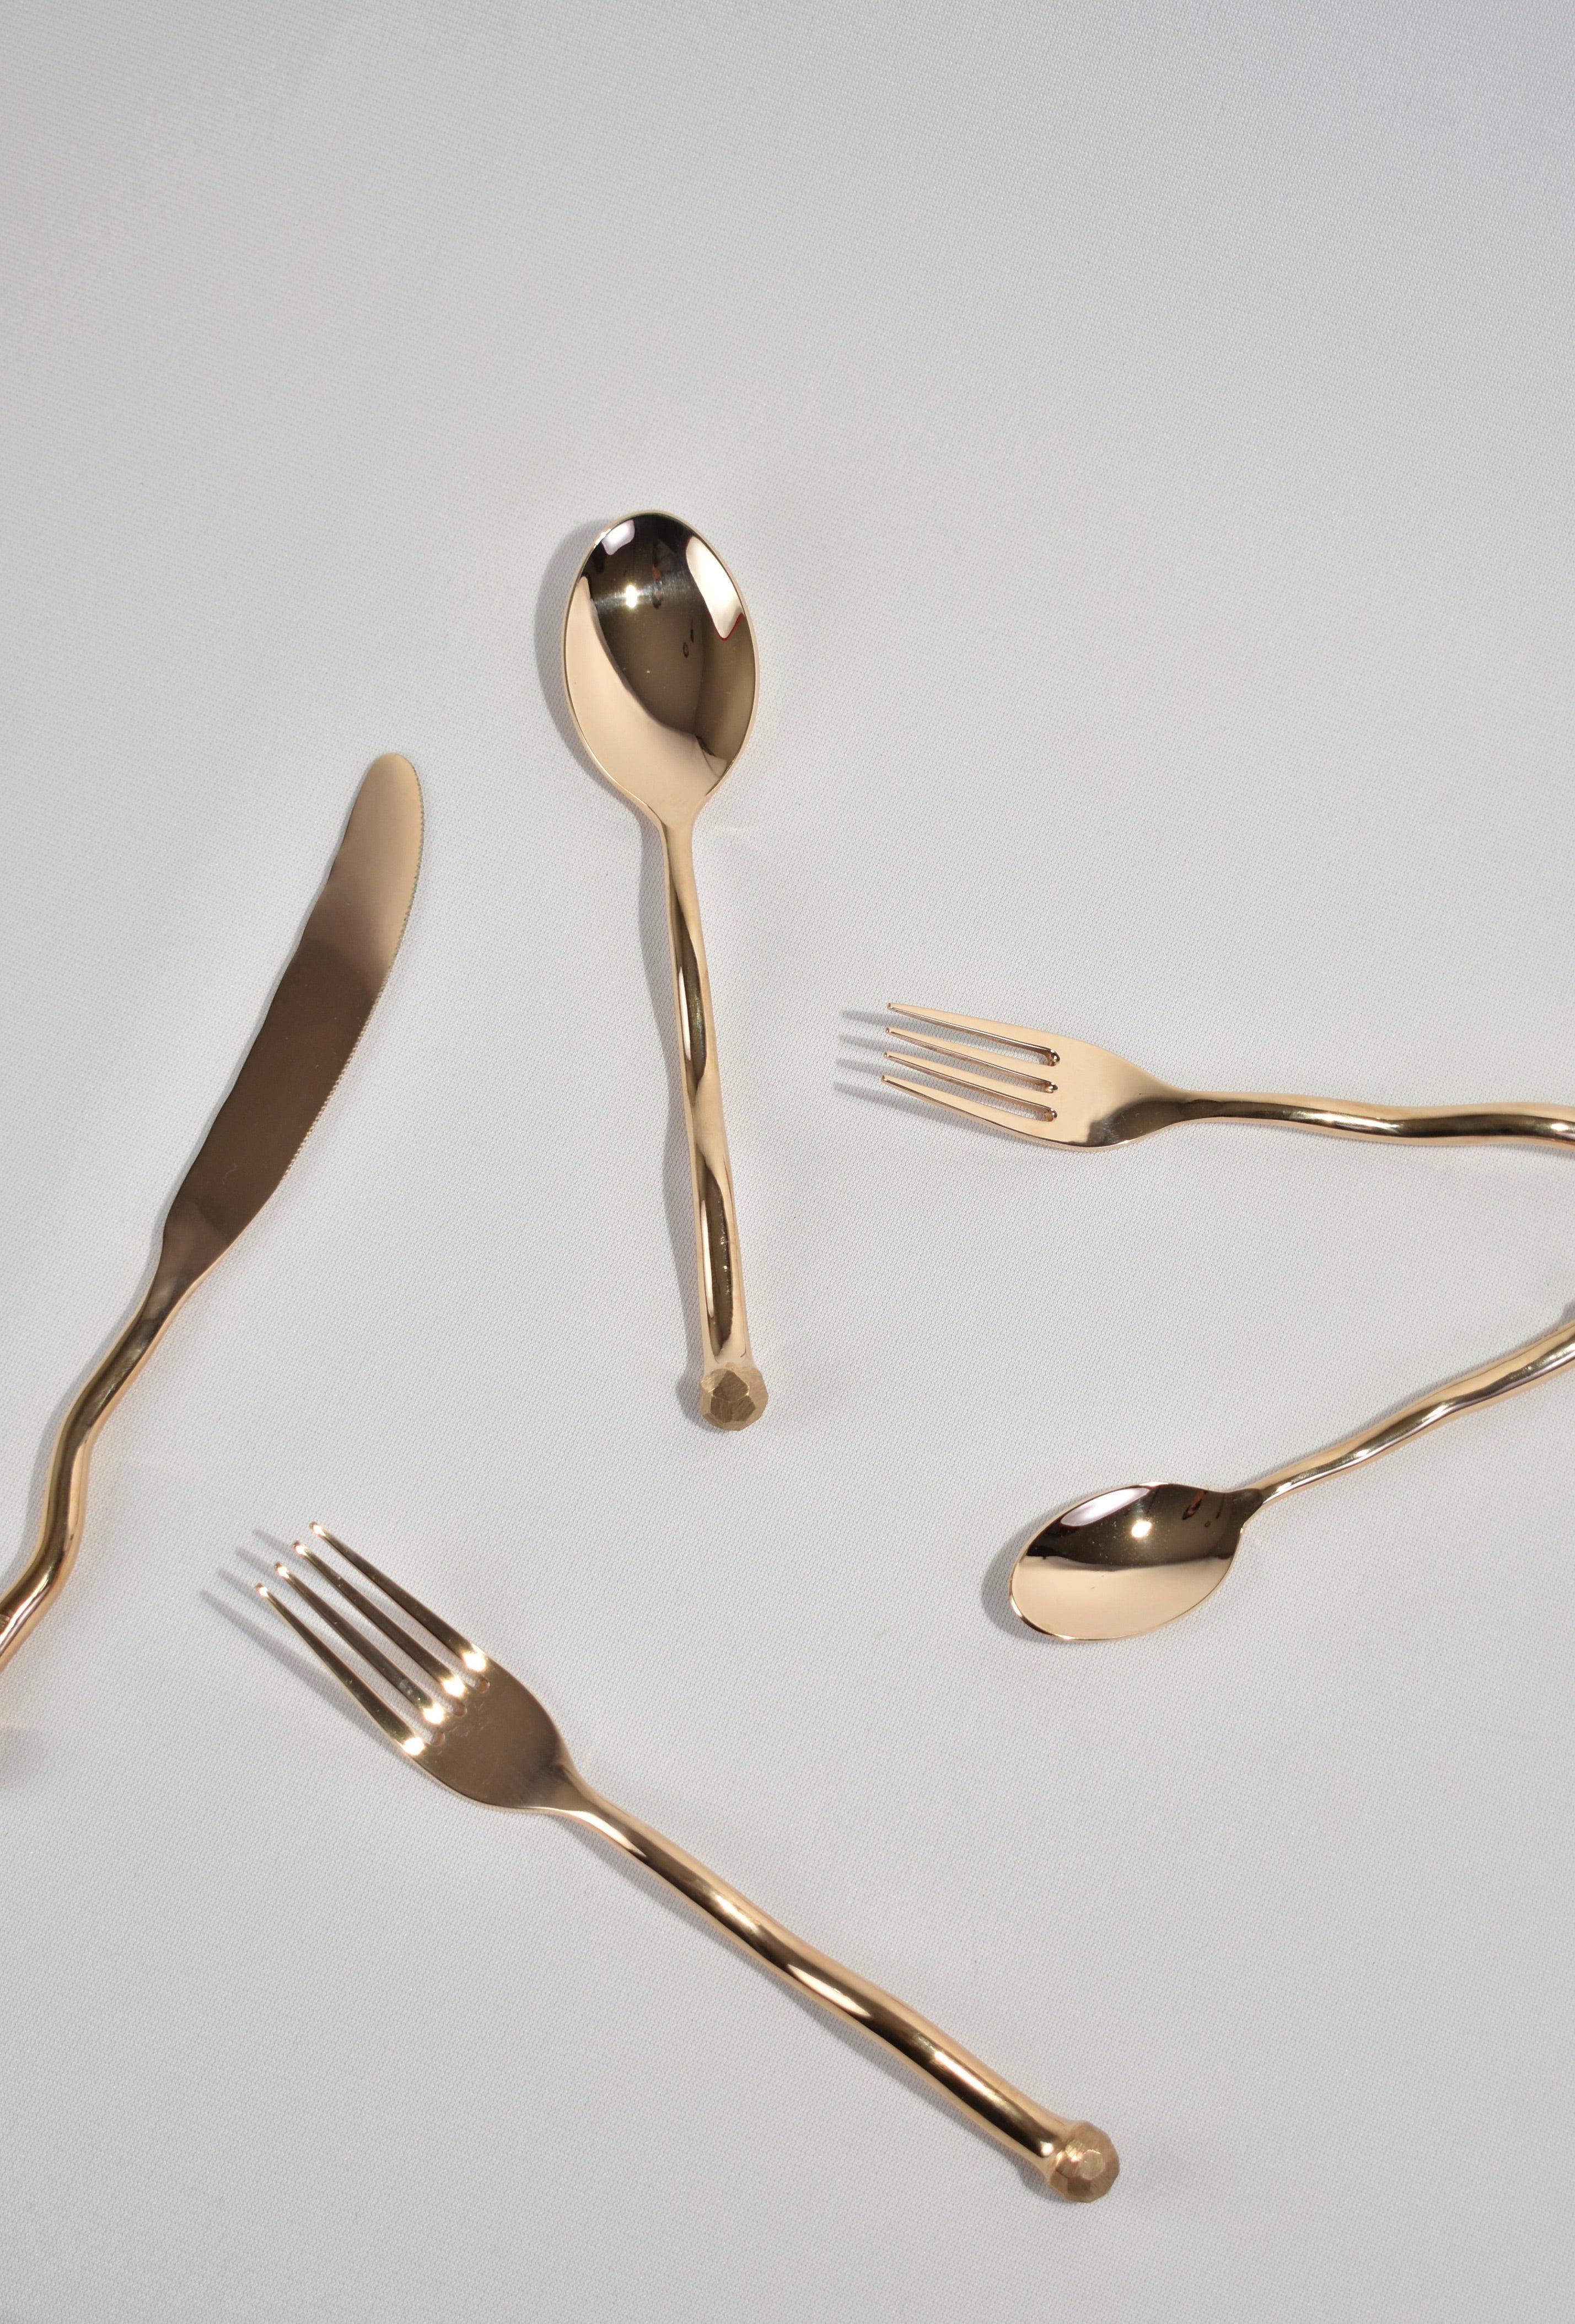 The re-issued 5 piece Sphere flatware set in bronze by Izabel Lam. Each piece features an undulating handle and hammered textured knob on end. Impressed above knob on underside of handle: 'IZABEL LAM'. 

Originally designed in the late 1980s by